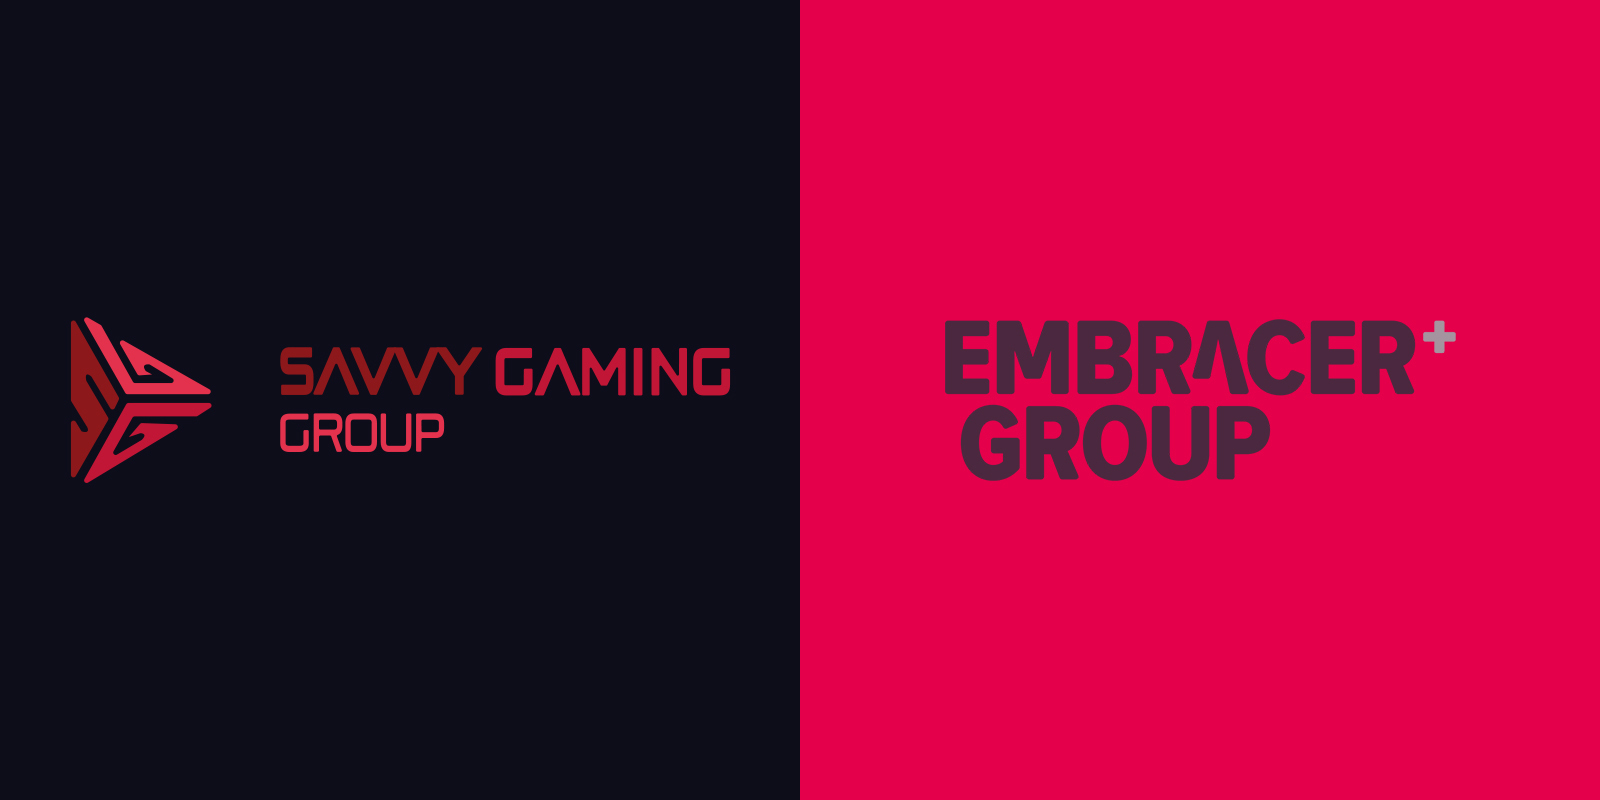 savvy gaming group embracer group